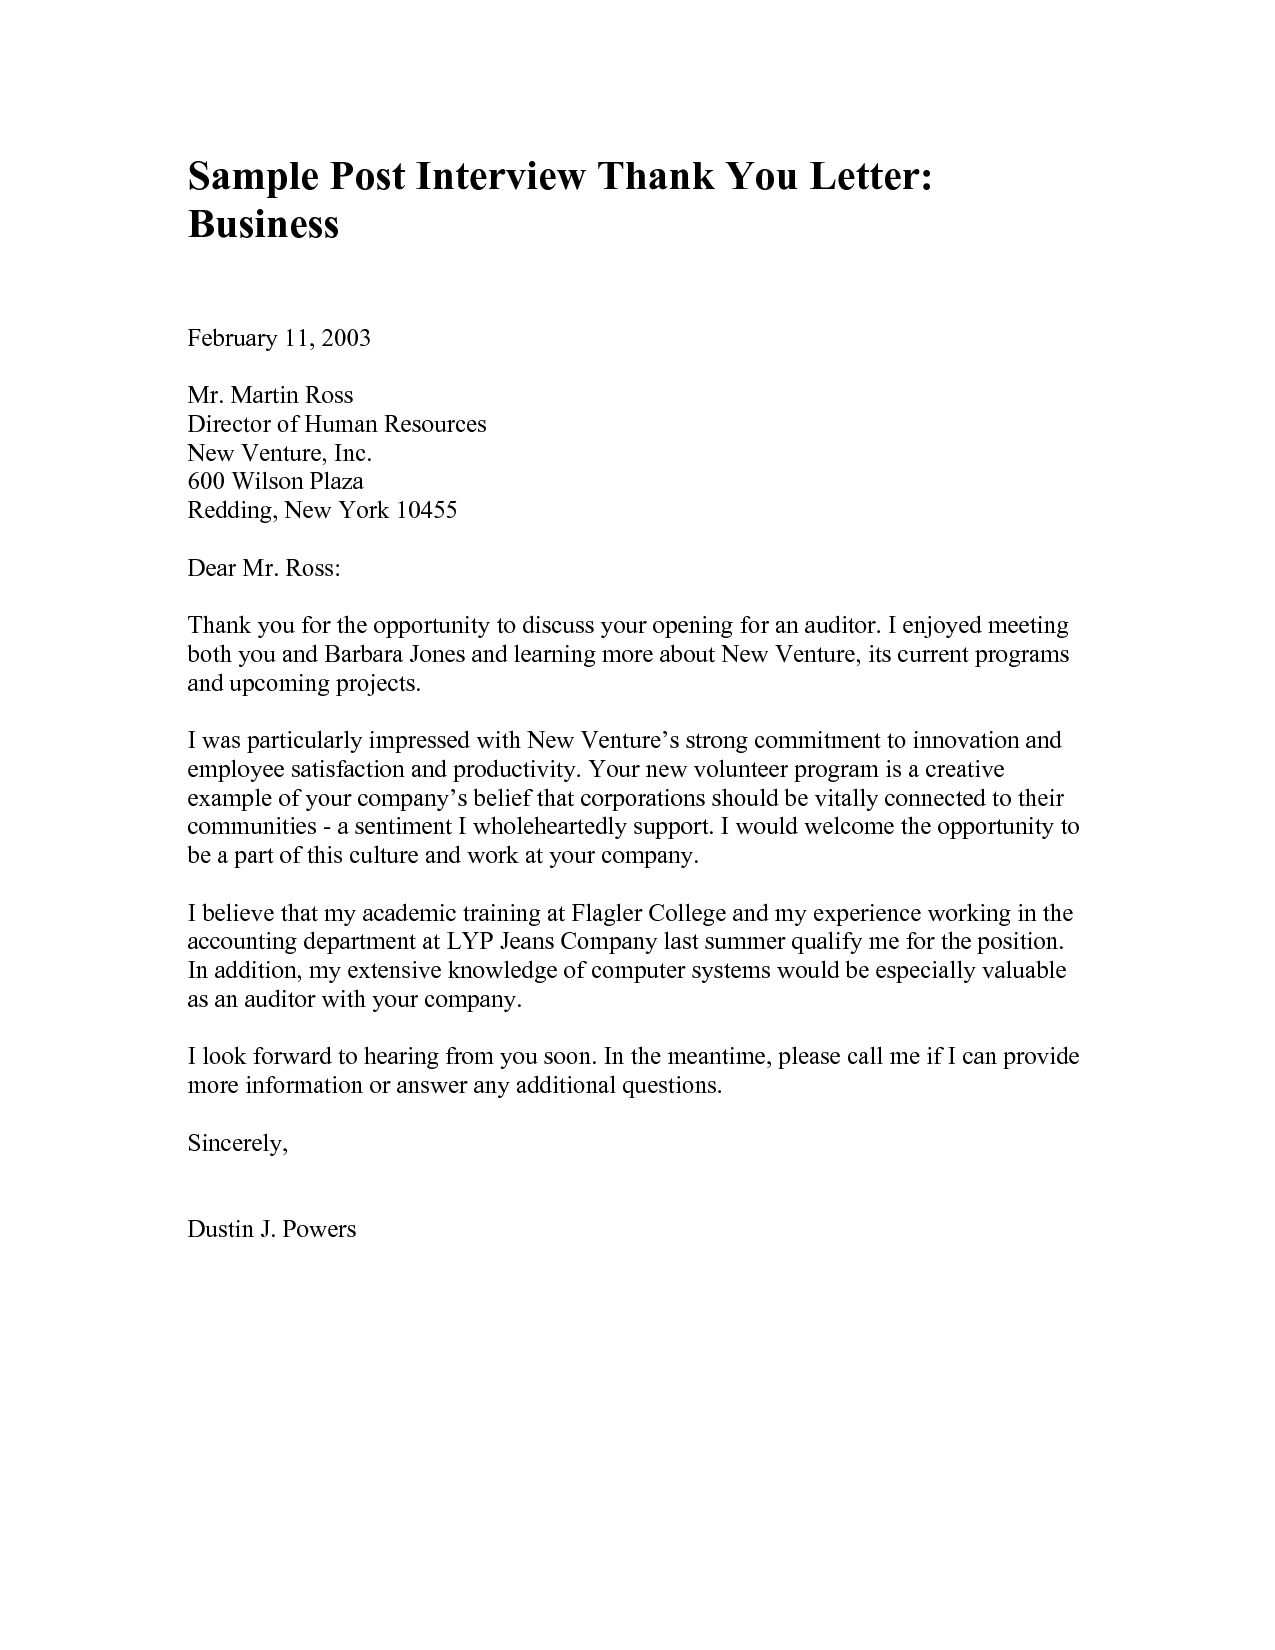 Sample Business Thank You Letter – 12+ Free Word, Excel, PDF 